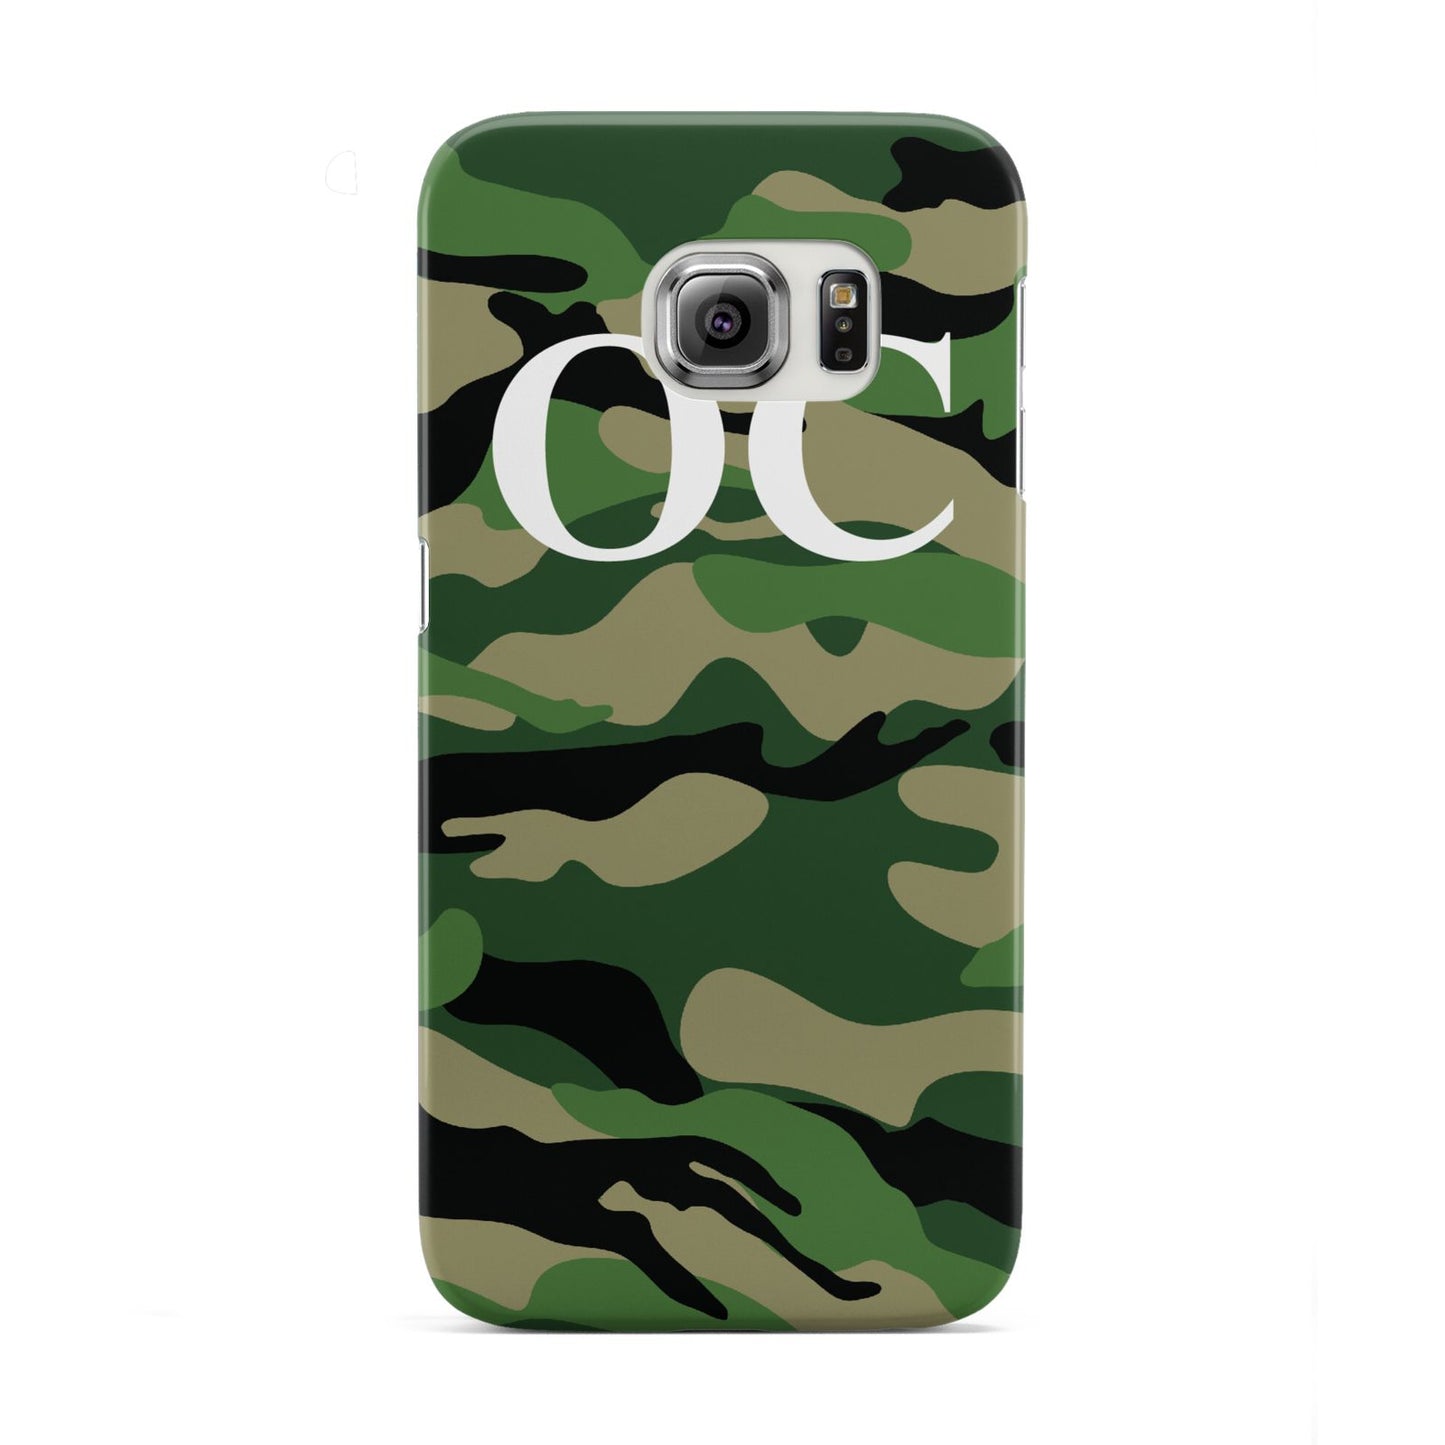 Personalised Camouflage Samsung Galaxy S6 Edge Case